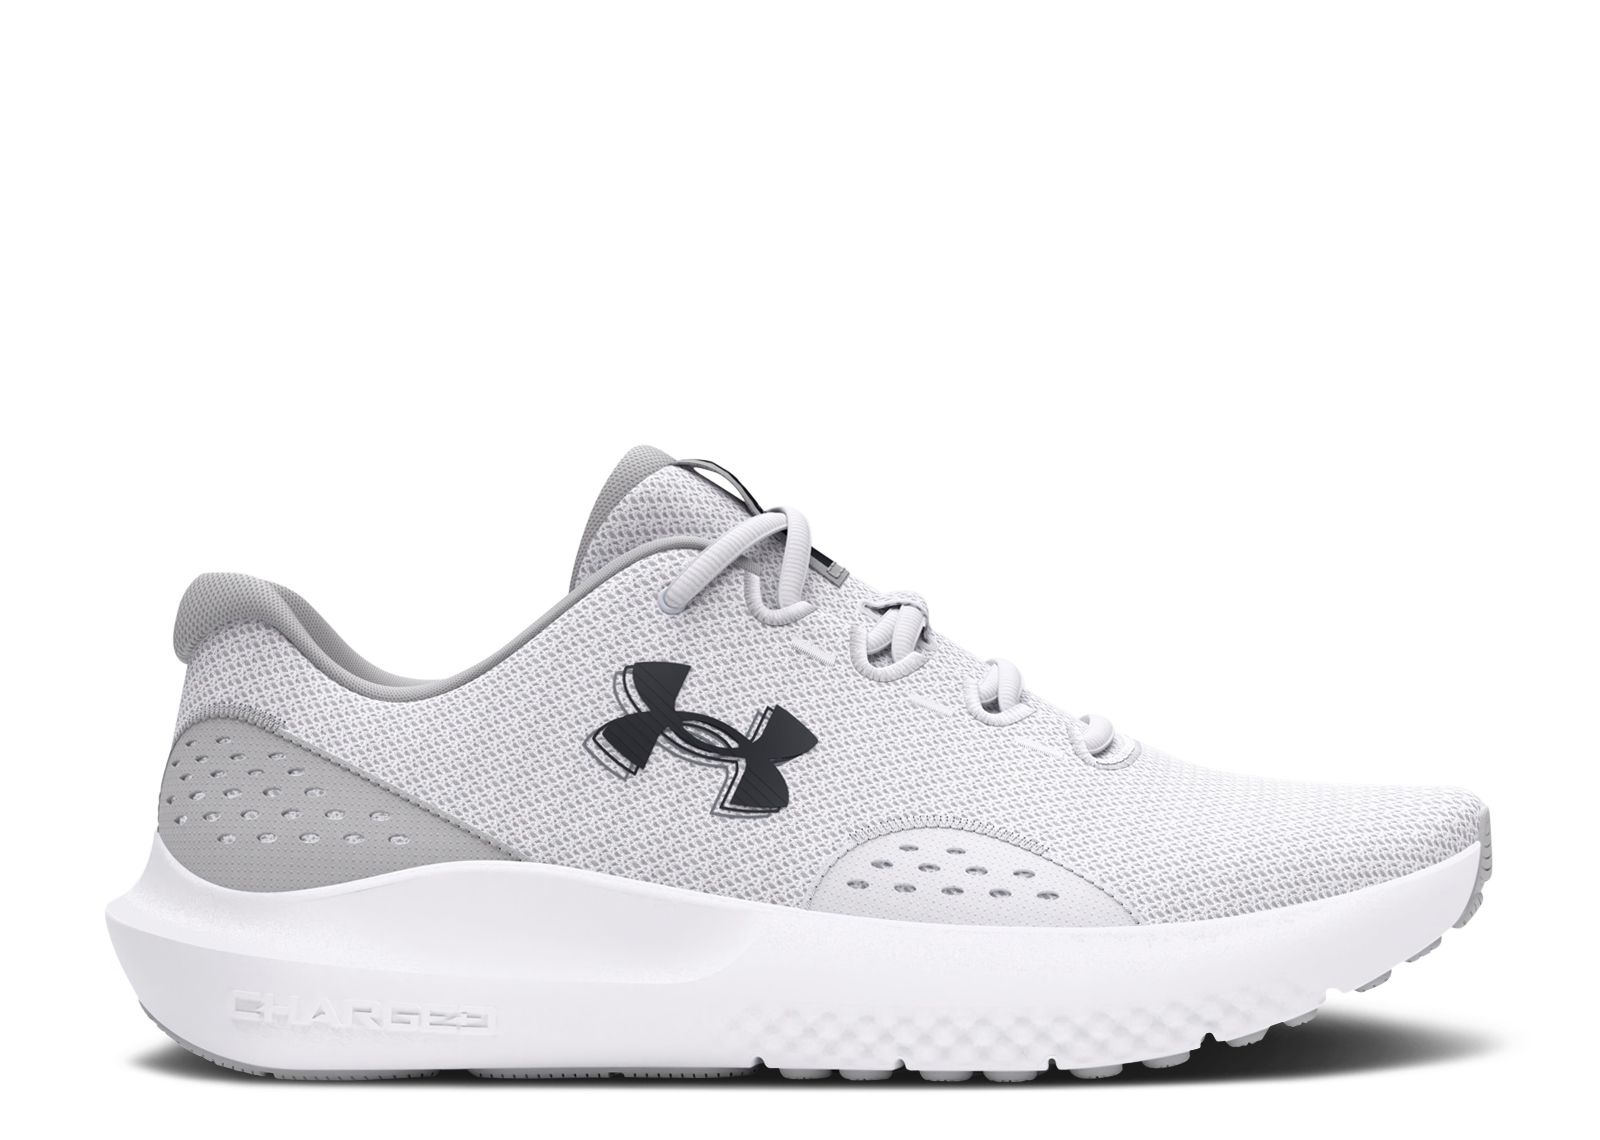 Under Armour Charged Focus 'Halo Grey White' 3024277-100